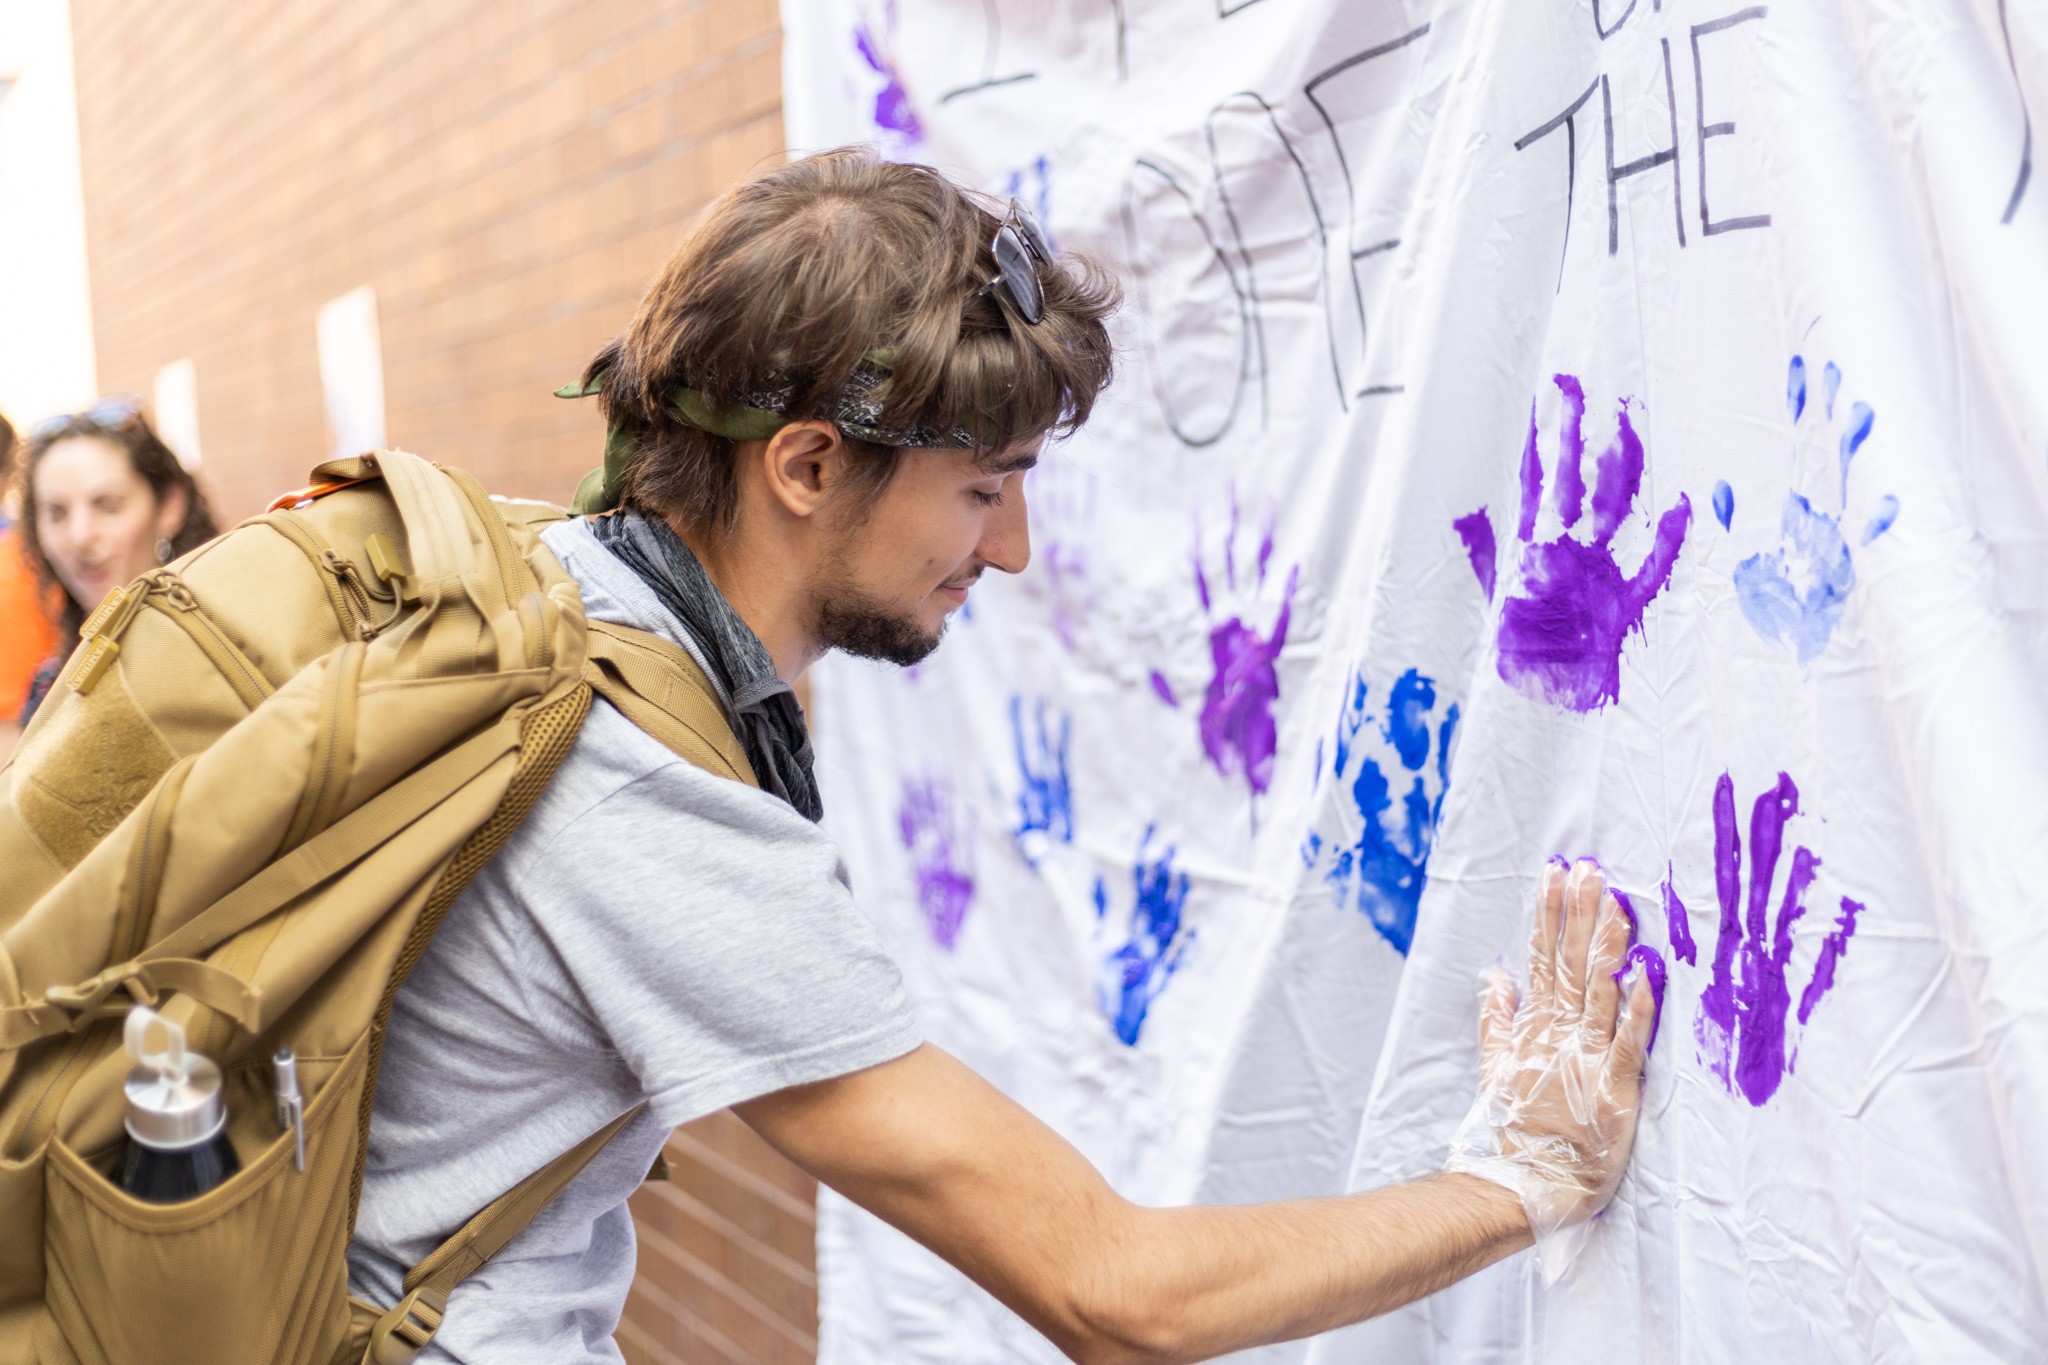 Student with paint on hand leaving a hand print on an NSPW art installation